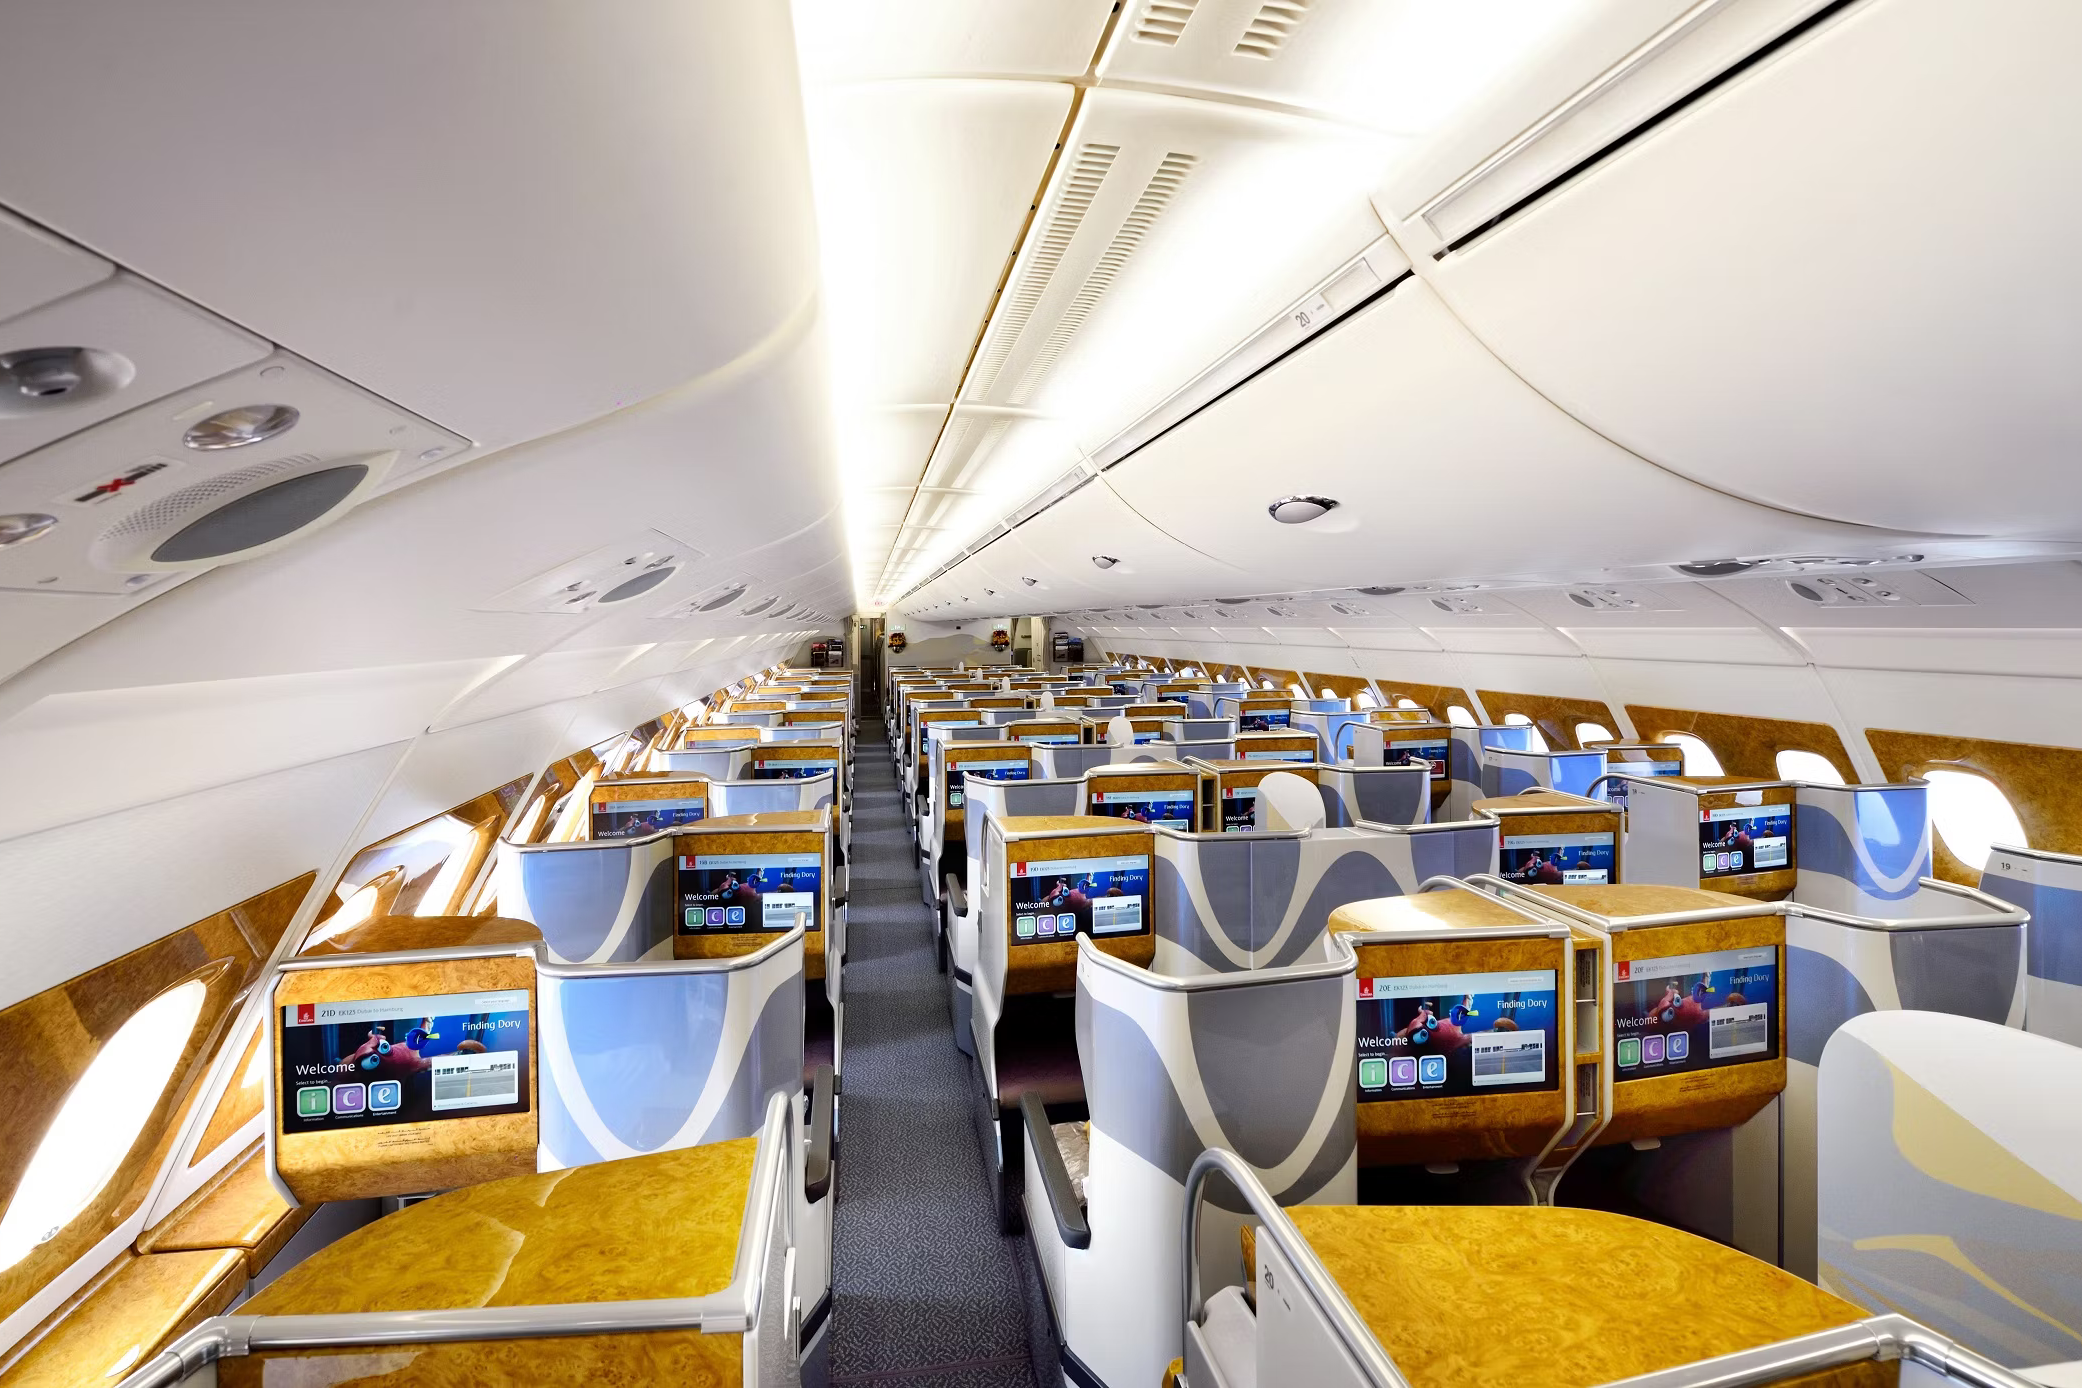 Inside The Emirates Airbus A380 Business Class Cabin.